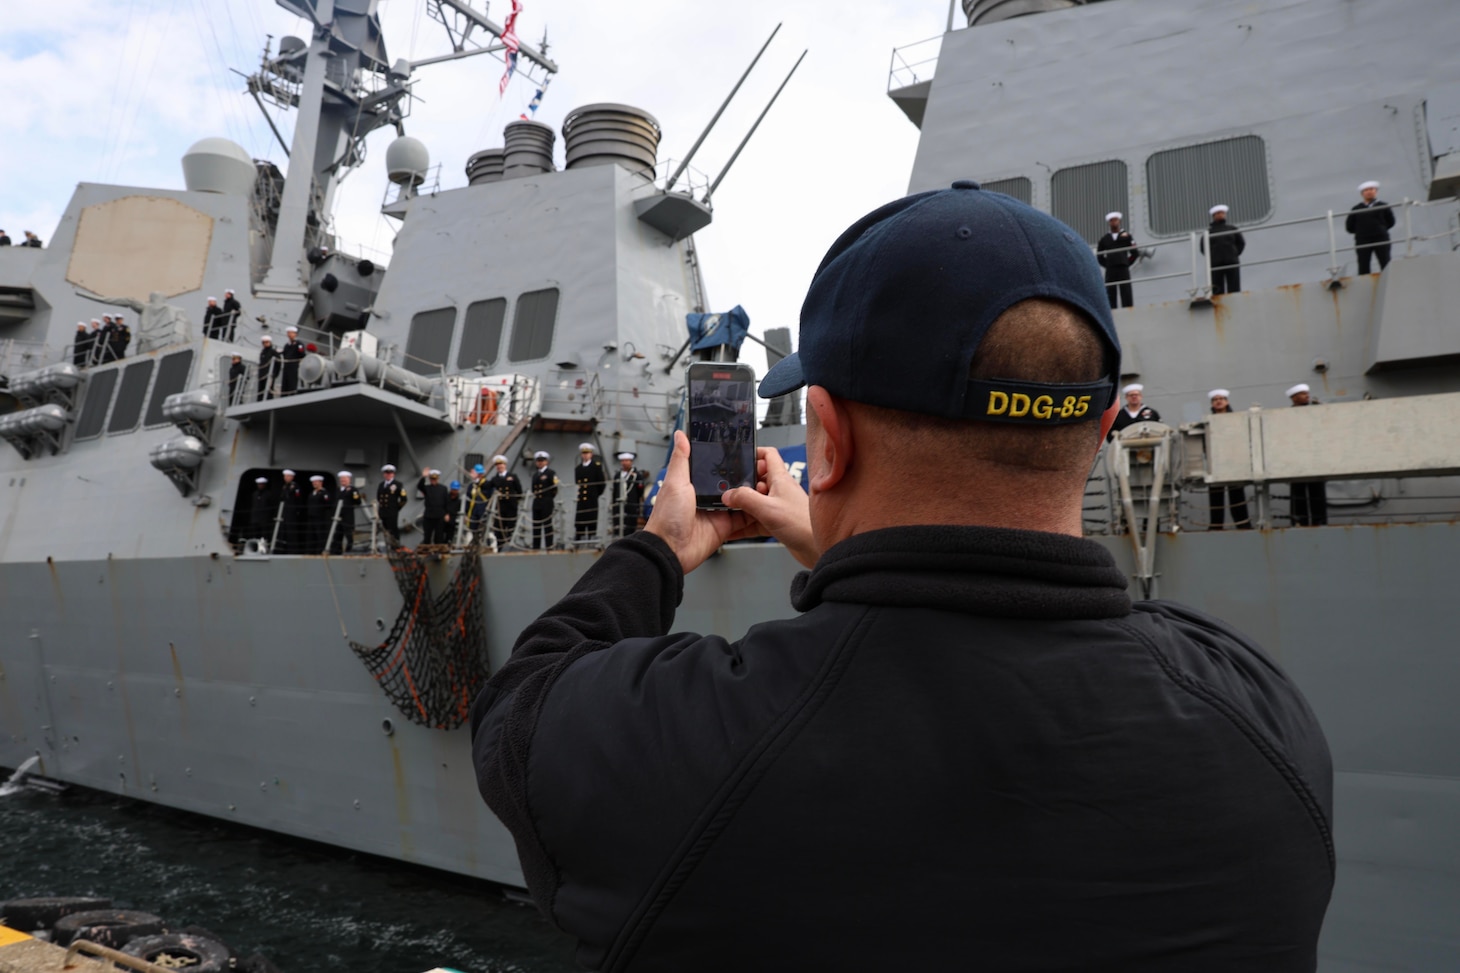 YOKOSUKA, Japan (March 2, 2024) – Senior Chief Culinary Specialist Lemuel Manlogon, from Quezon City, Philippines, takes a photo as the Arleigh Burke-class guided-missile destroyer USS McCampbell (DDG 85) returns to Commander, Fleet Activities Yokosuka, March 2, after a 17-month Depot Modernization Period in Portland, Oregon. McCampbell is forward-deployed and assigned to Destroyer Squadron (DESRON) 15, the Navy’s largest DESRON and the U.S. 7th Fleet’s principal surface force. (U.S. Navy photo by Mass Communication Specialist 1st Class Greg Johnson)